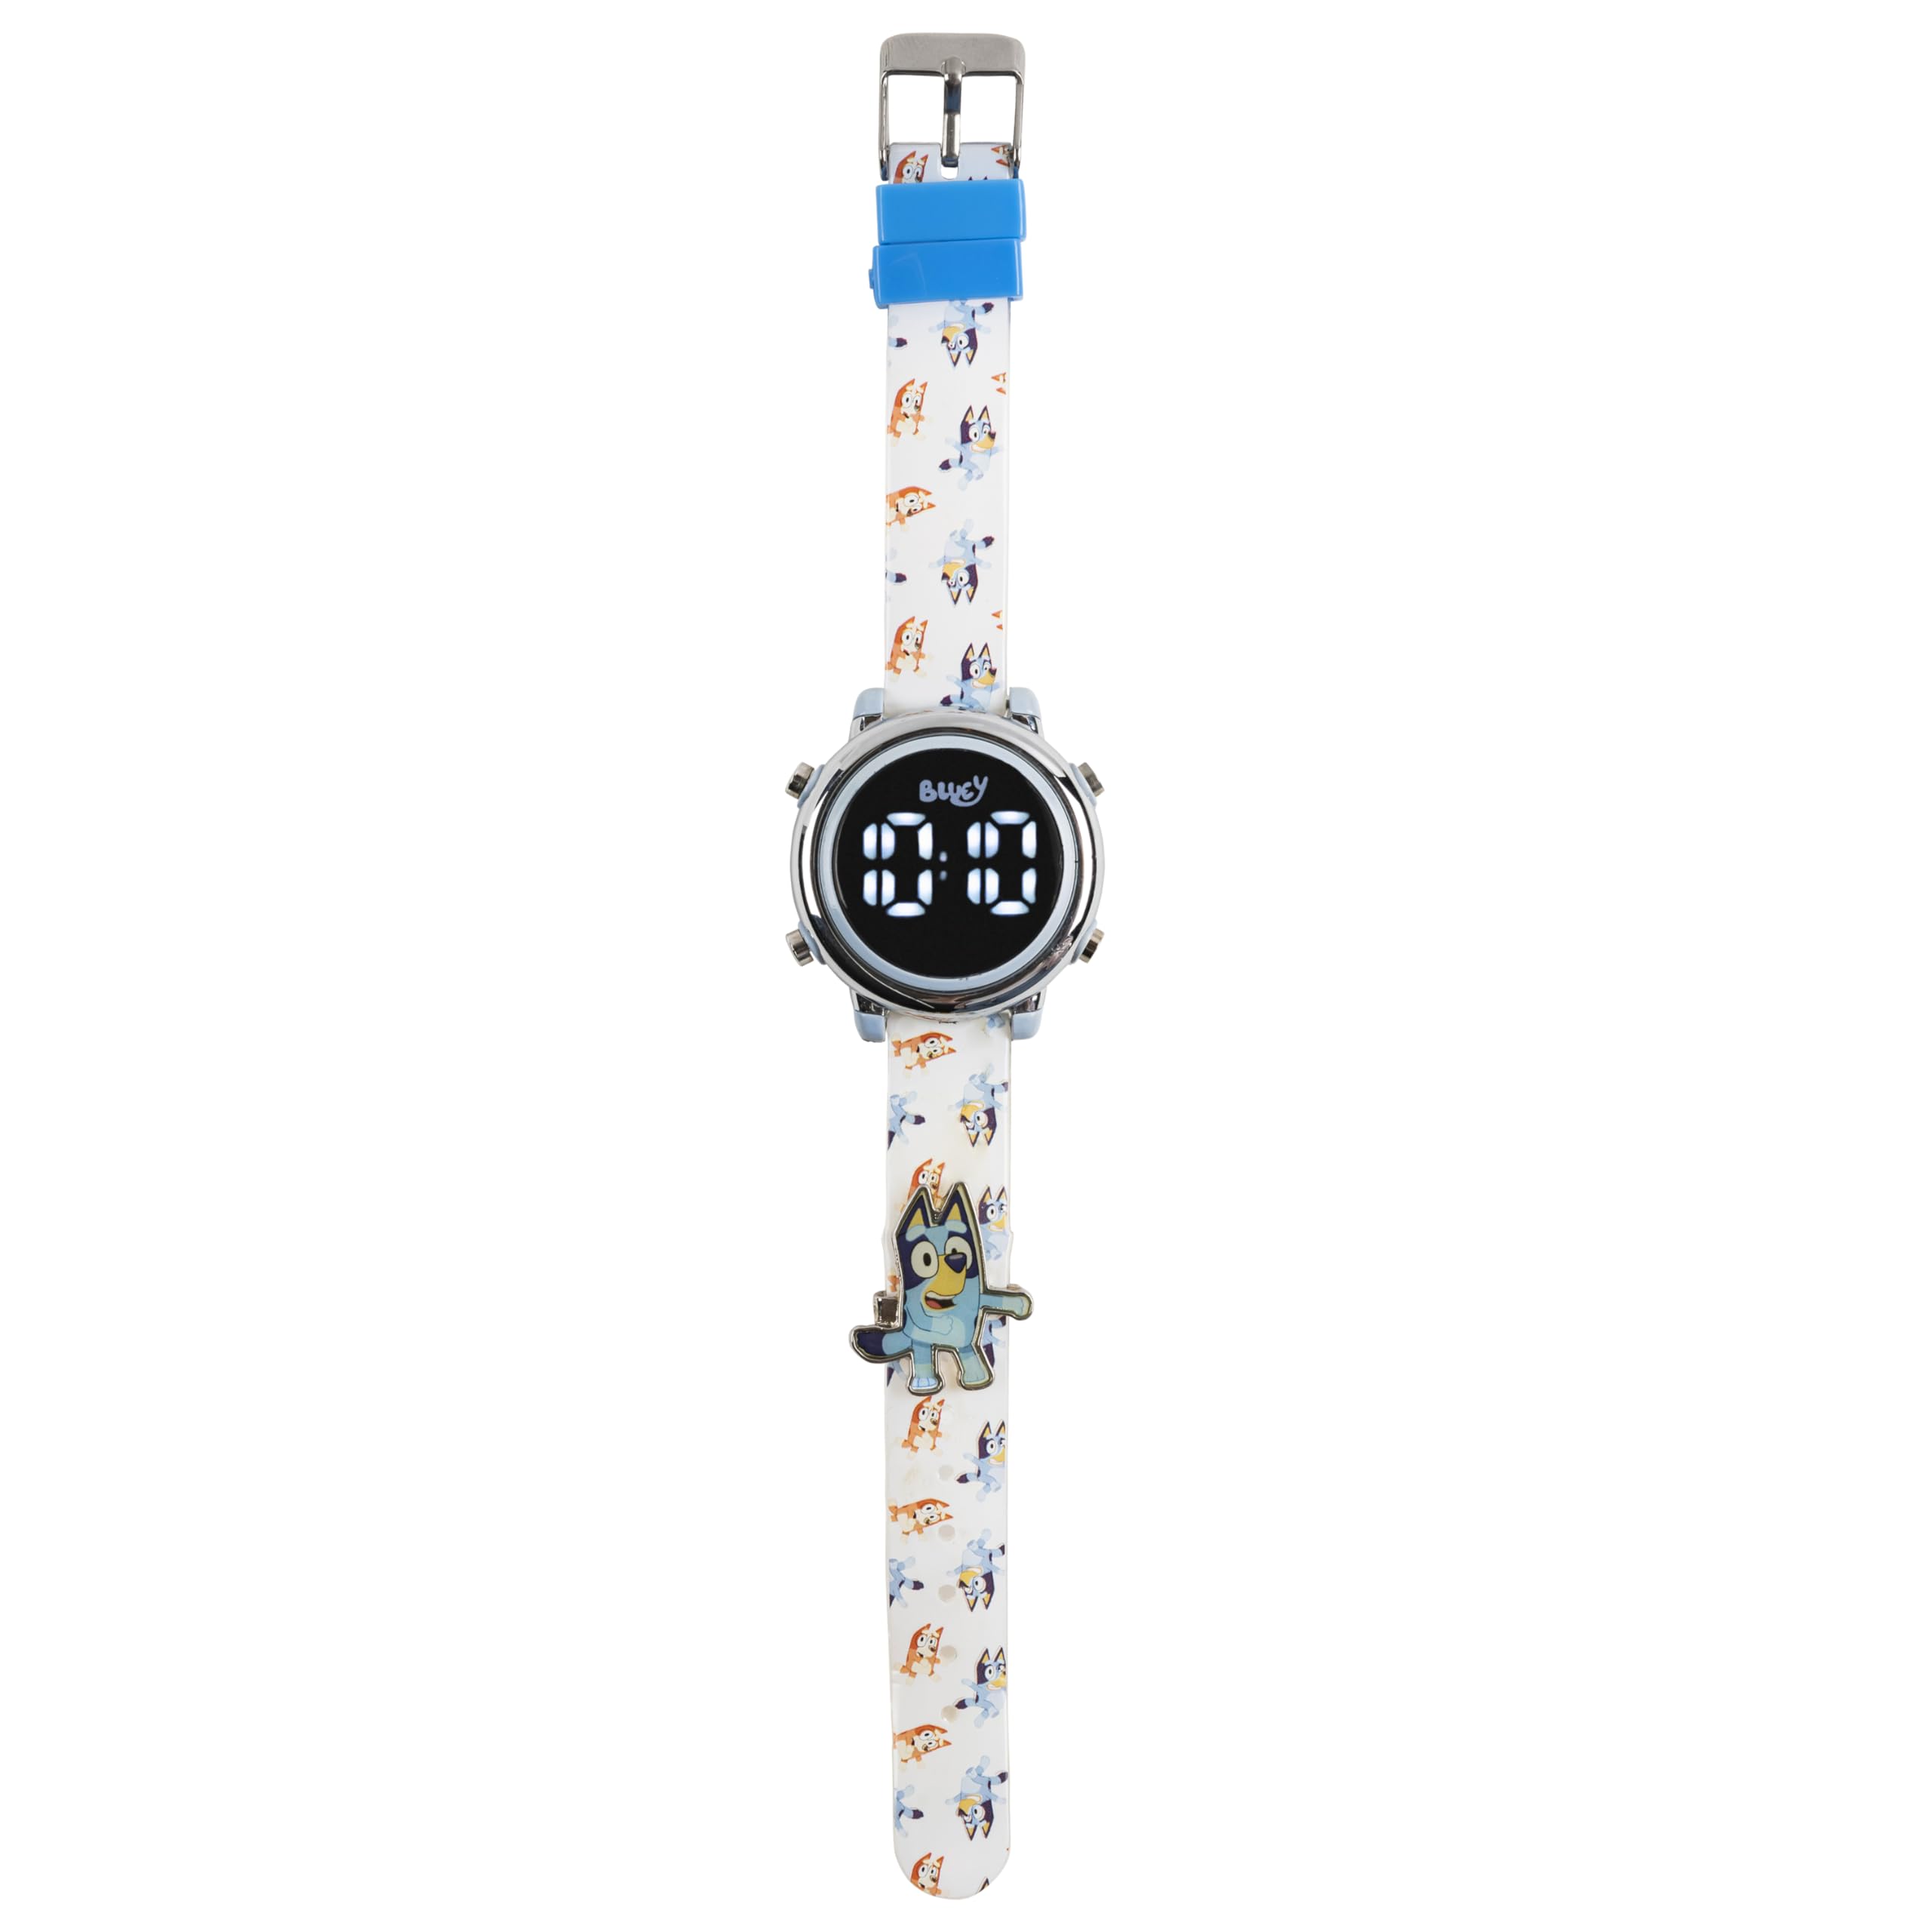 Accutime Kids Bluey and Bingo LED Digital Quartz Kids Watch for Toddlers, Boys and Girls – White Silicone Strap with Black, Blue and White Digital Display (Model: BLY4003AZ)